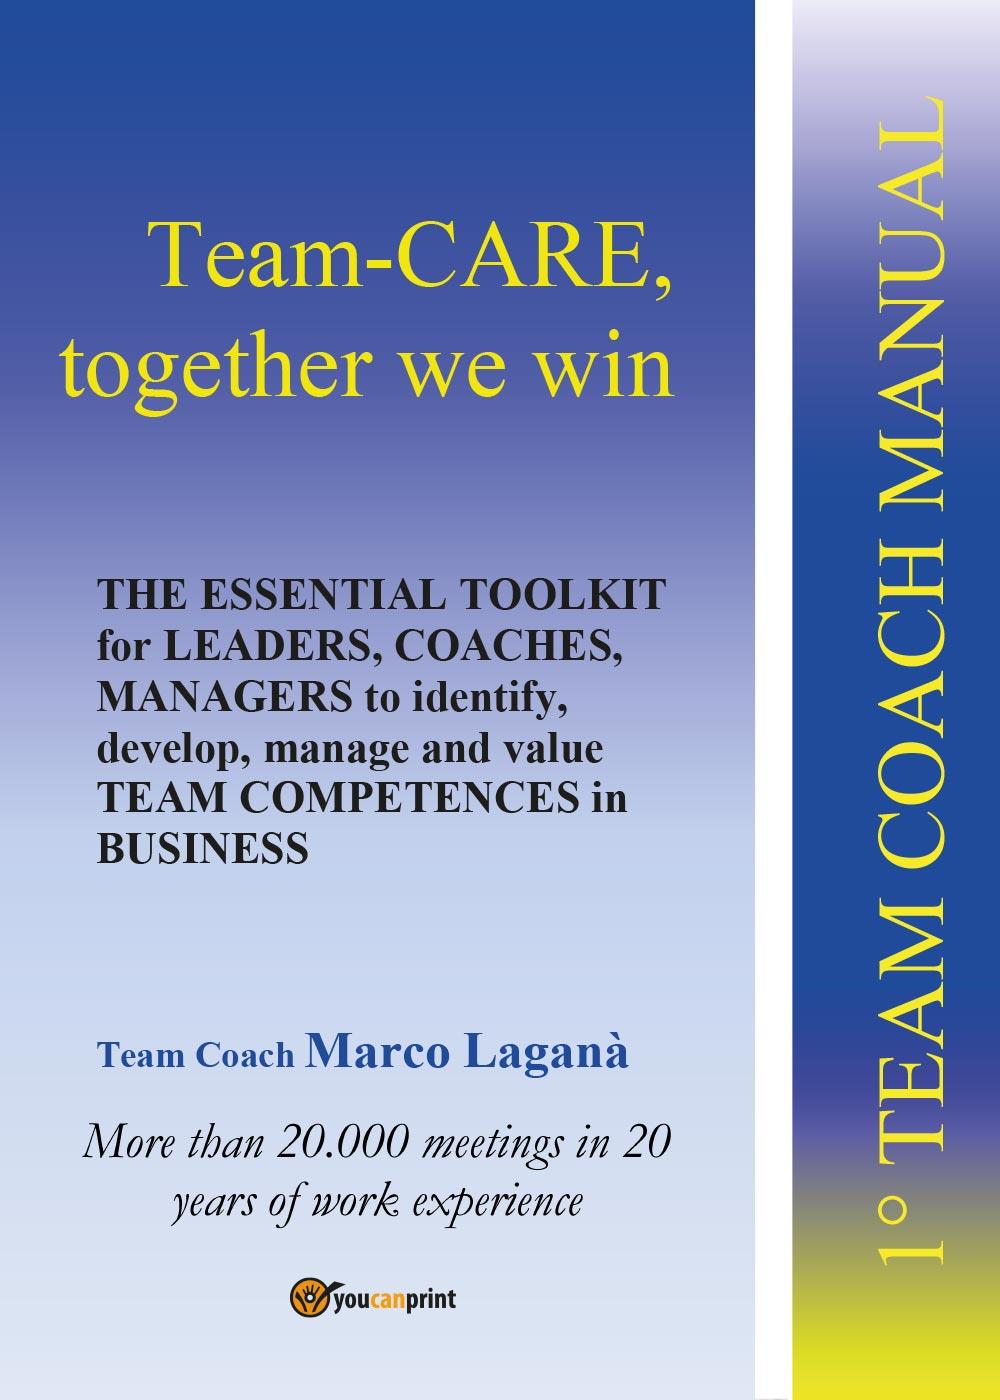 Team-CARE, together we win